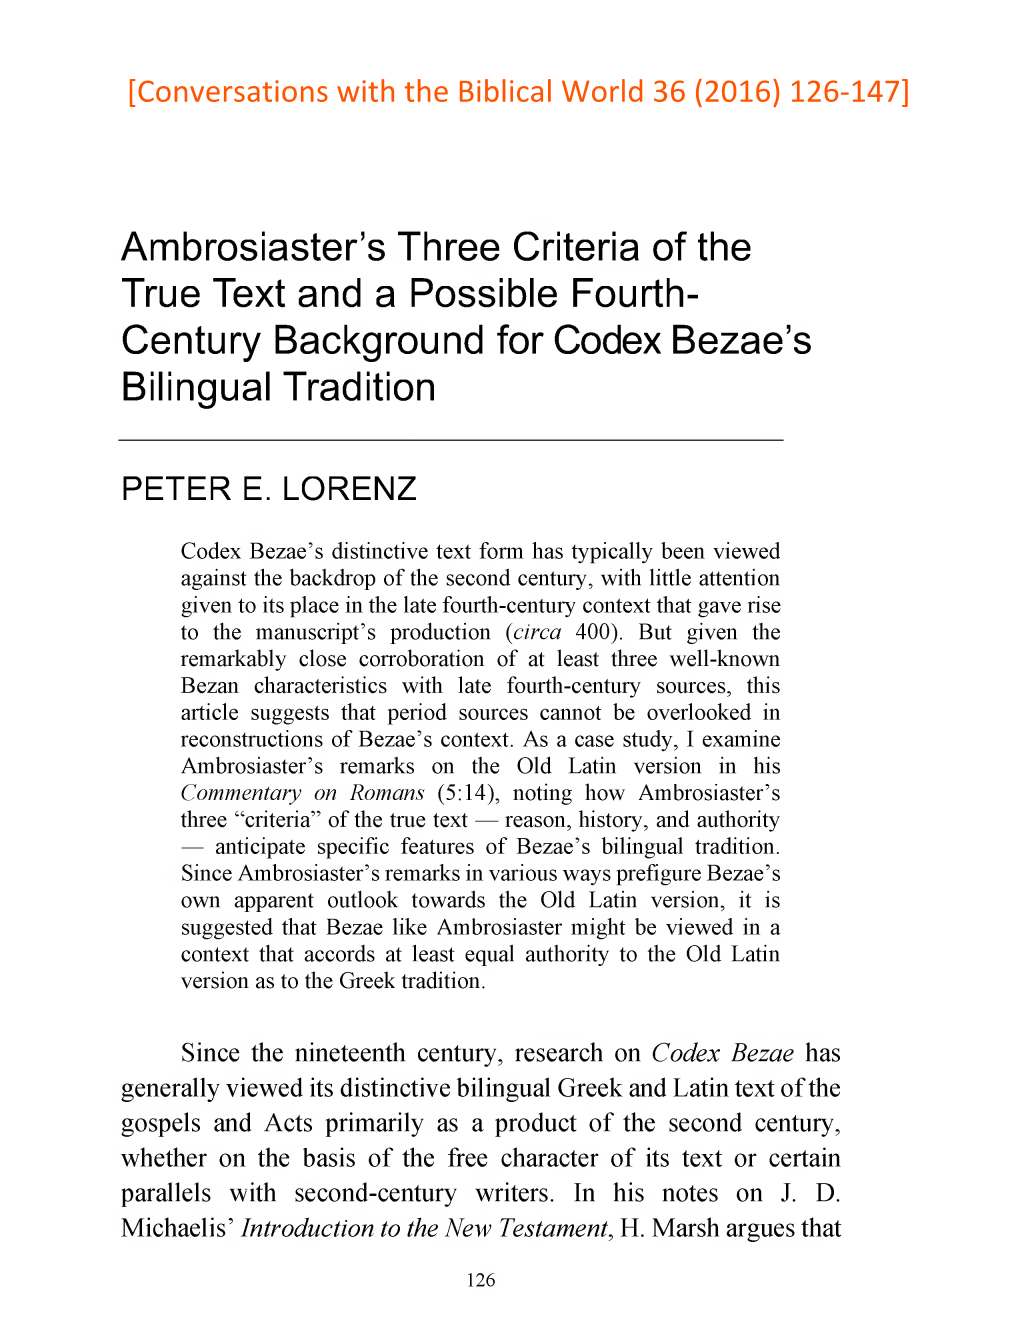 Ambrosiaster's Three Criteria of the True Text And